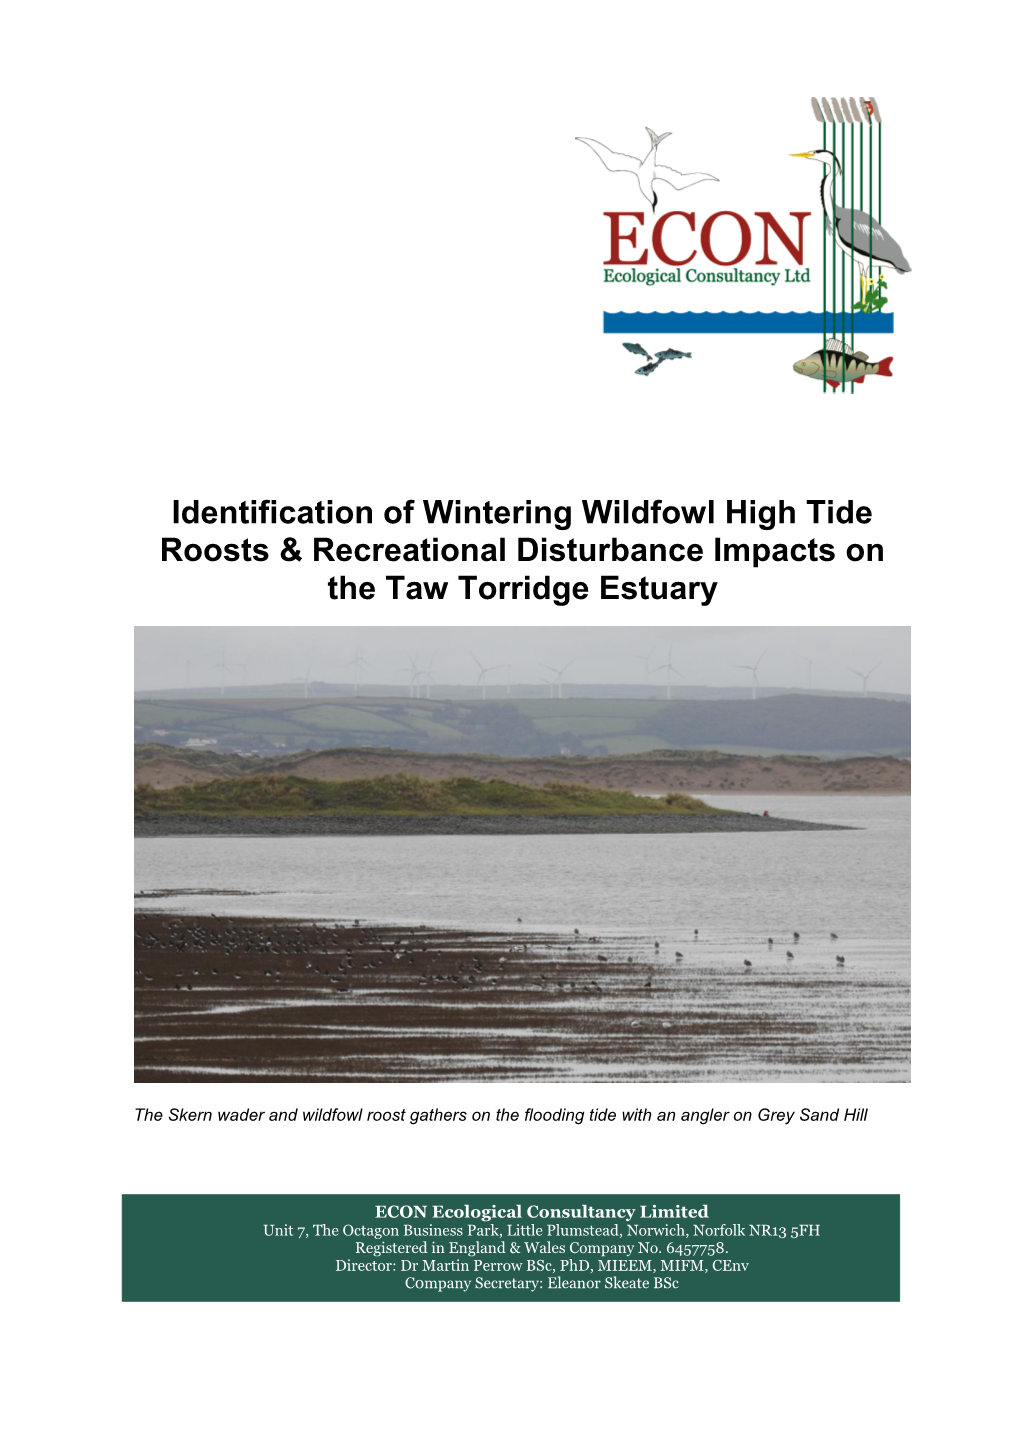 Final Report Identification of Wintering Wildfowl High Tide Roosts And